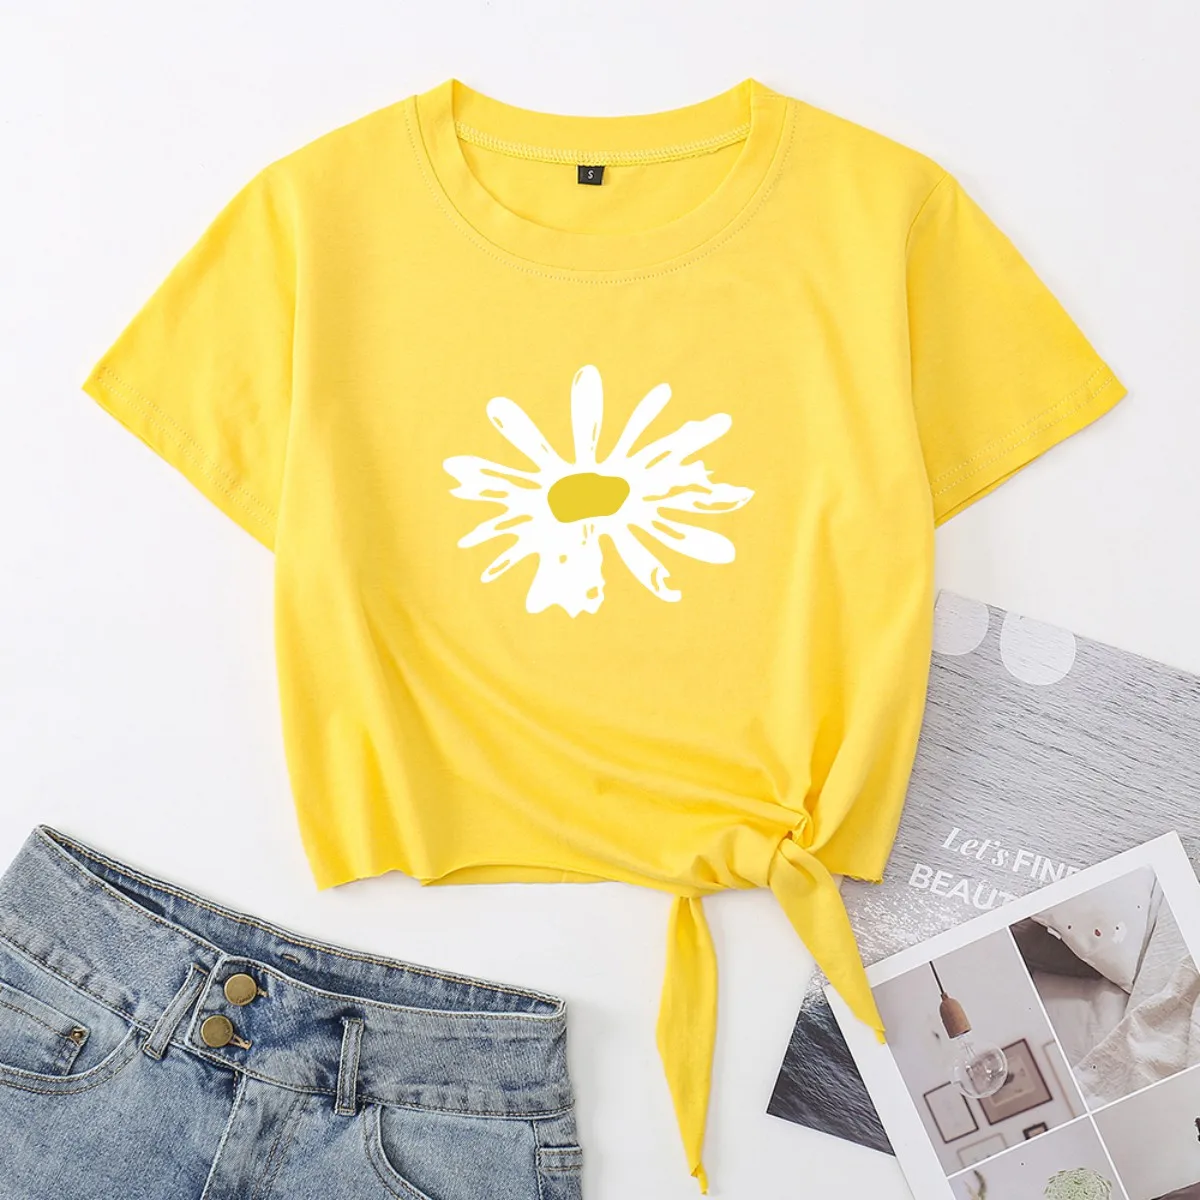 

Daisy Wildflower Knotted Crop Top Shirt Women's Summer Short Sleeve Cotton T-Shirt Cropped Tops Graphic Tee with Front Tie Knot